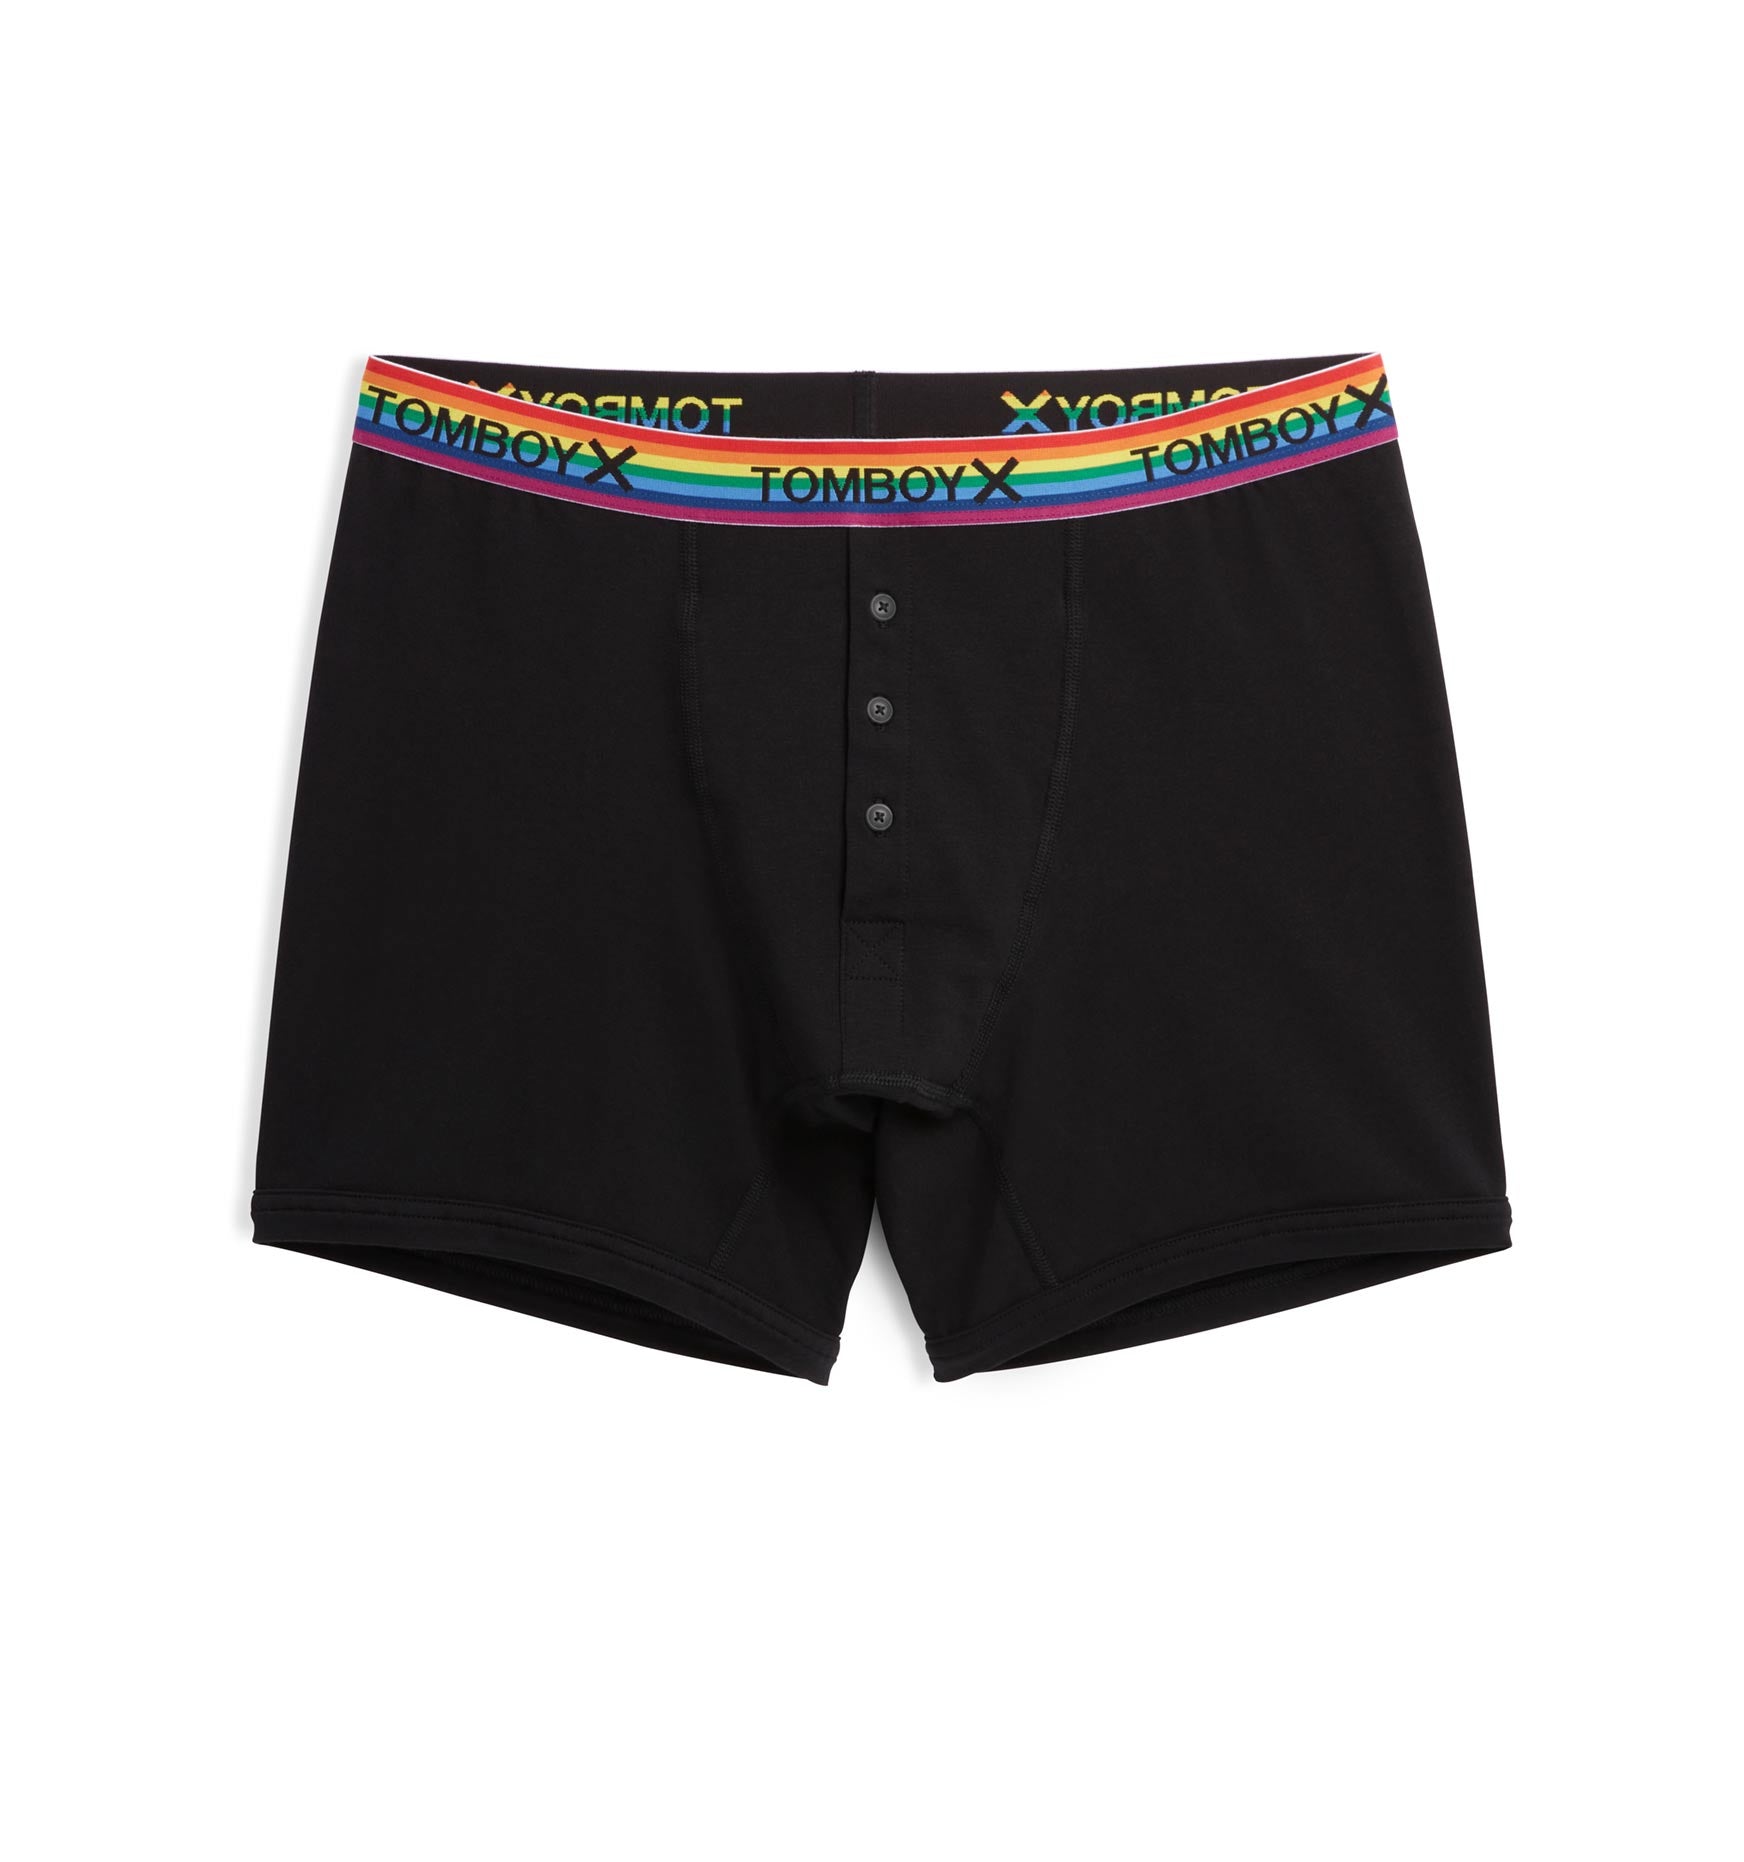 6 Fly Packing Boxer - Black Rainbow